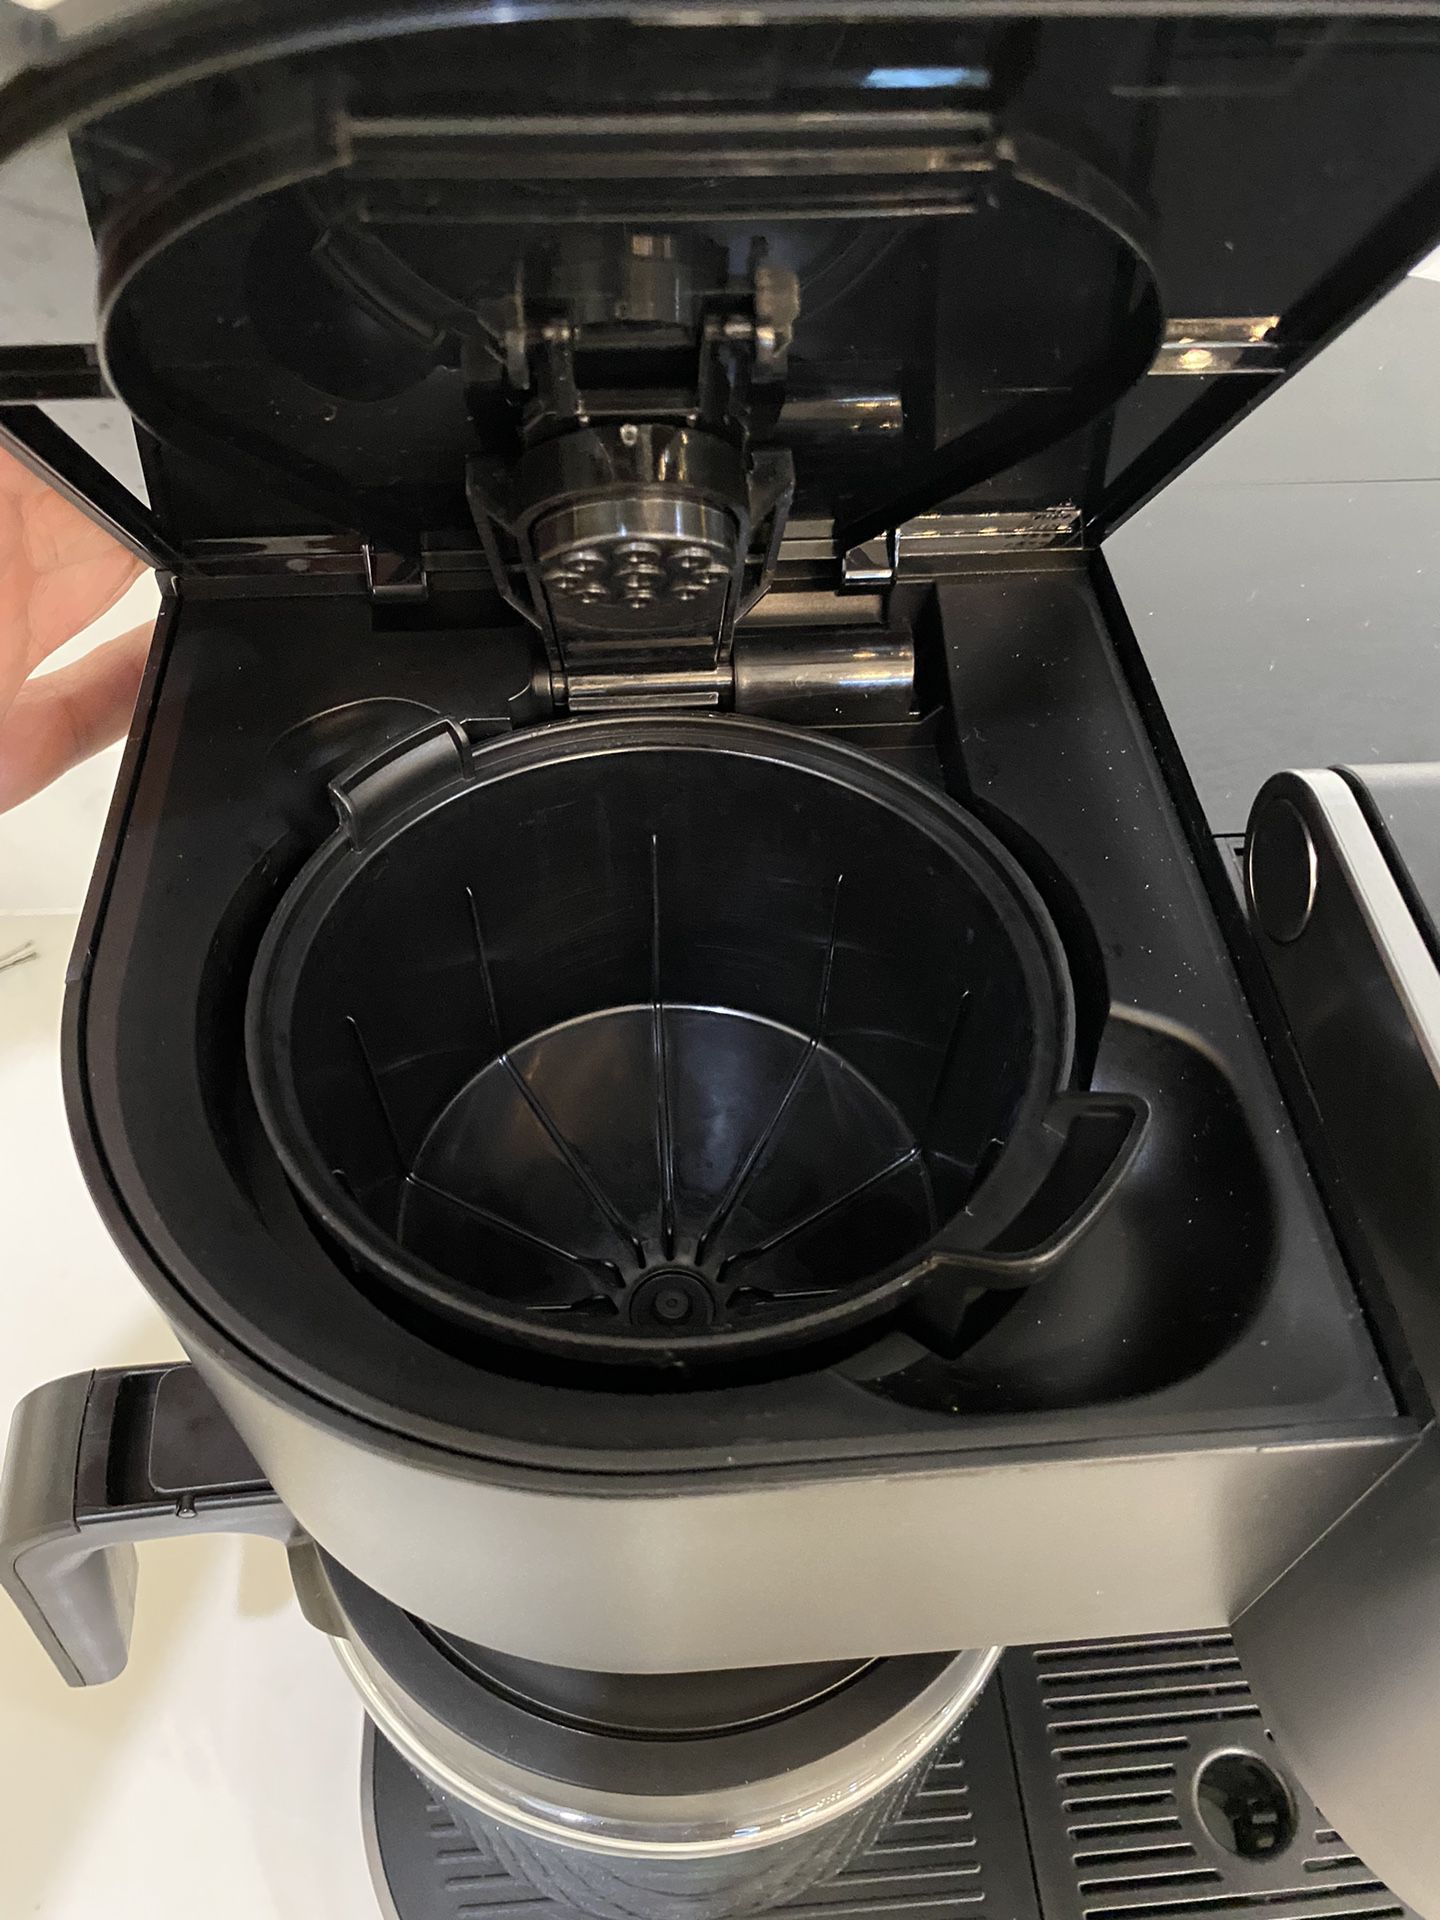 Keurig - K-Duo Plus 12-Cup Coffee Maker and Single Serve K-Cup Brewer -  Black for Sale in Irvine, CA - OfferUp